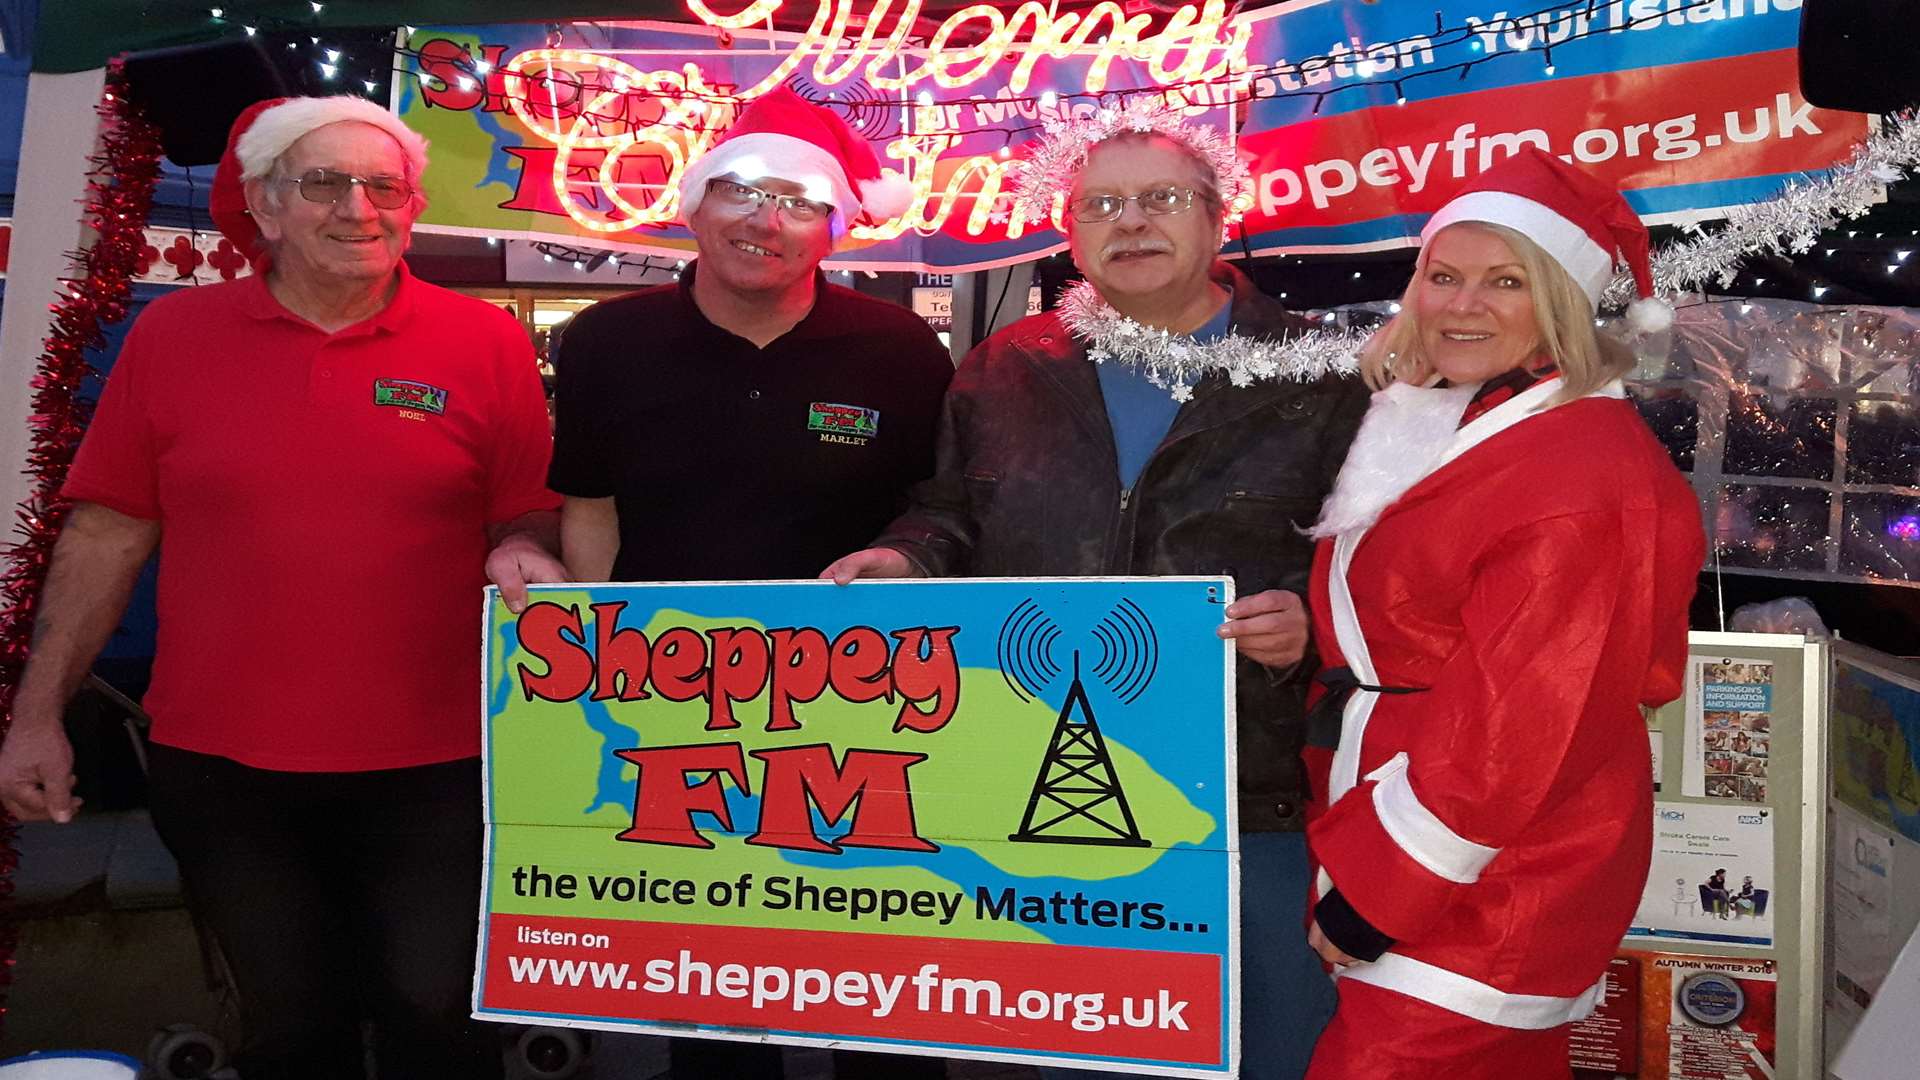 Members of the Sheppey FM Roadshow crew who were playing festive music at the clock tower